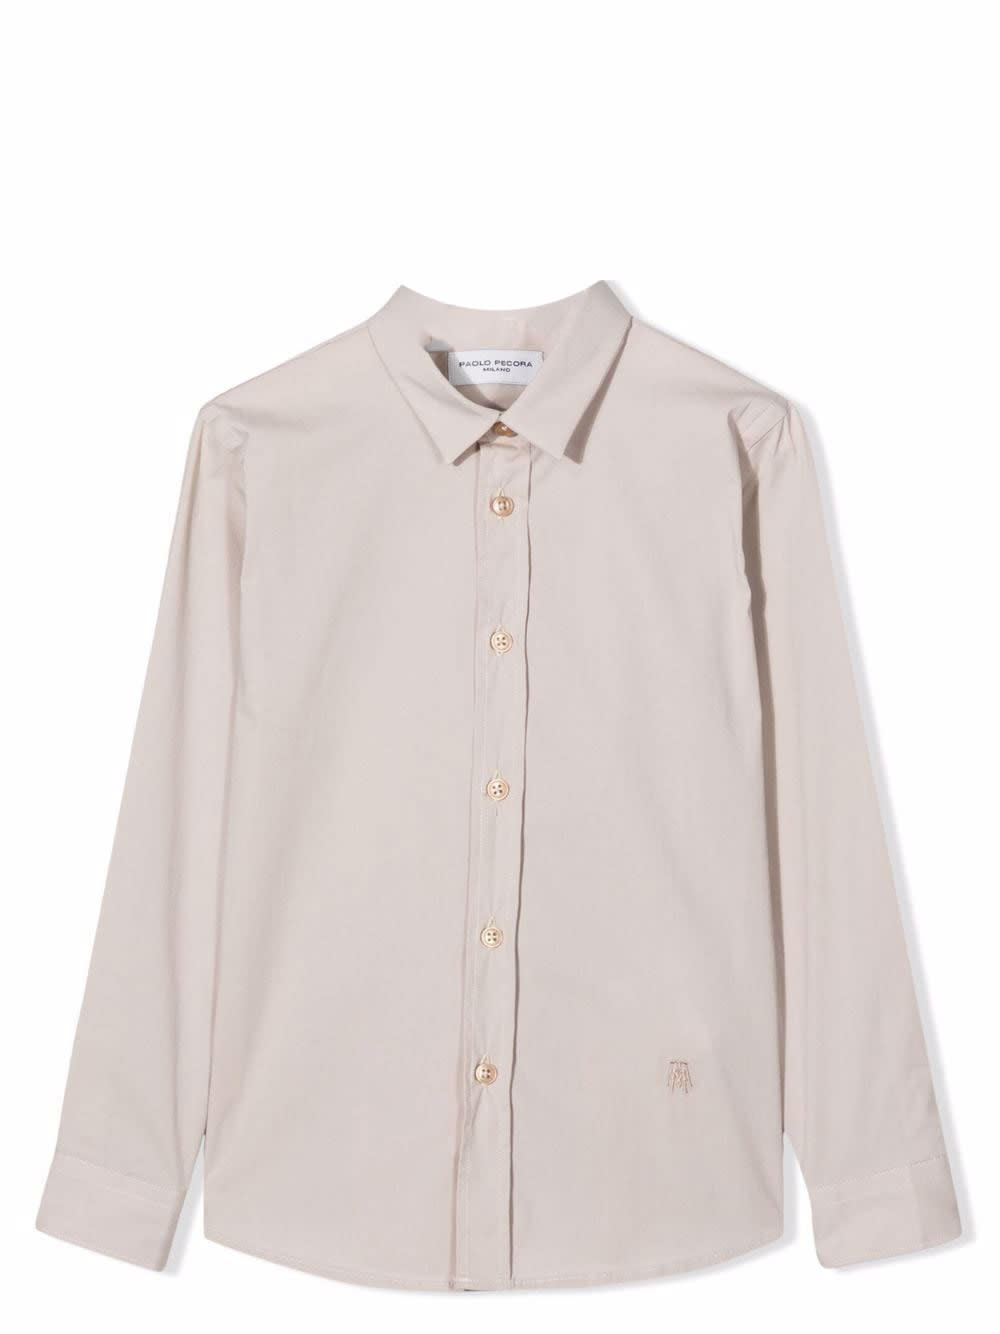 Paolo Pecora Shirt With Embroidery